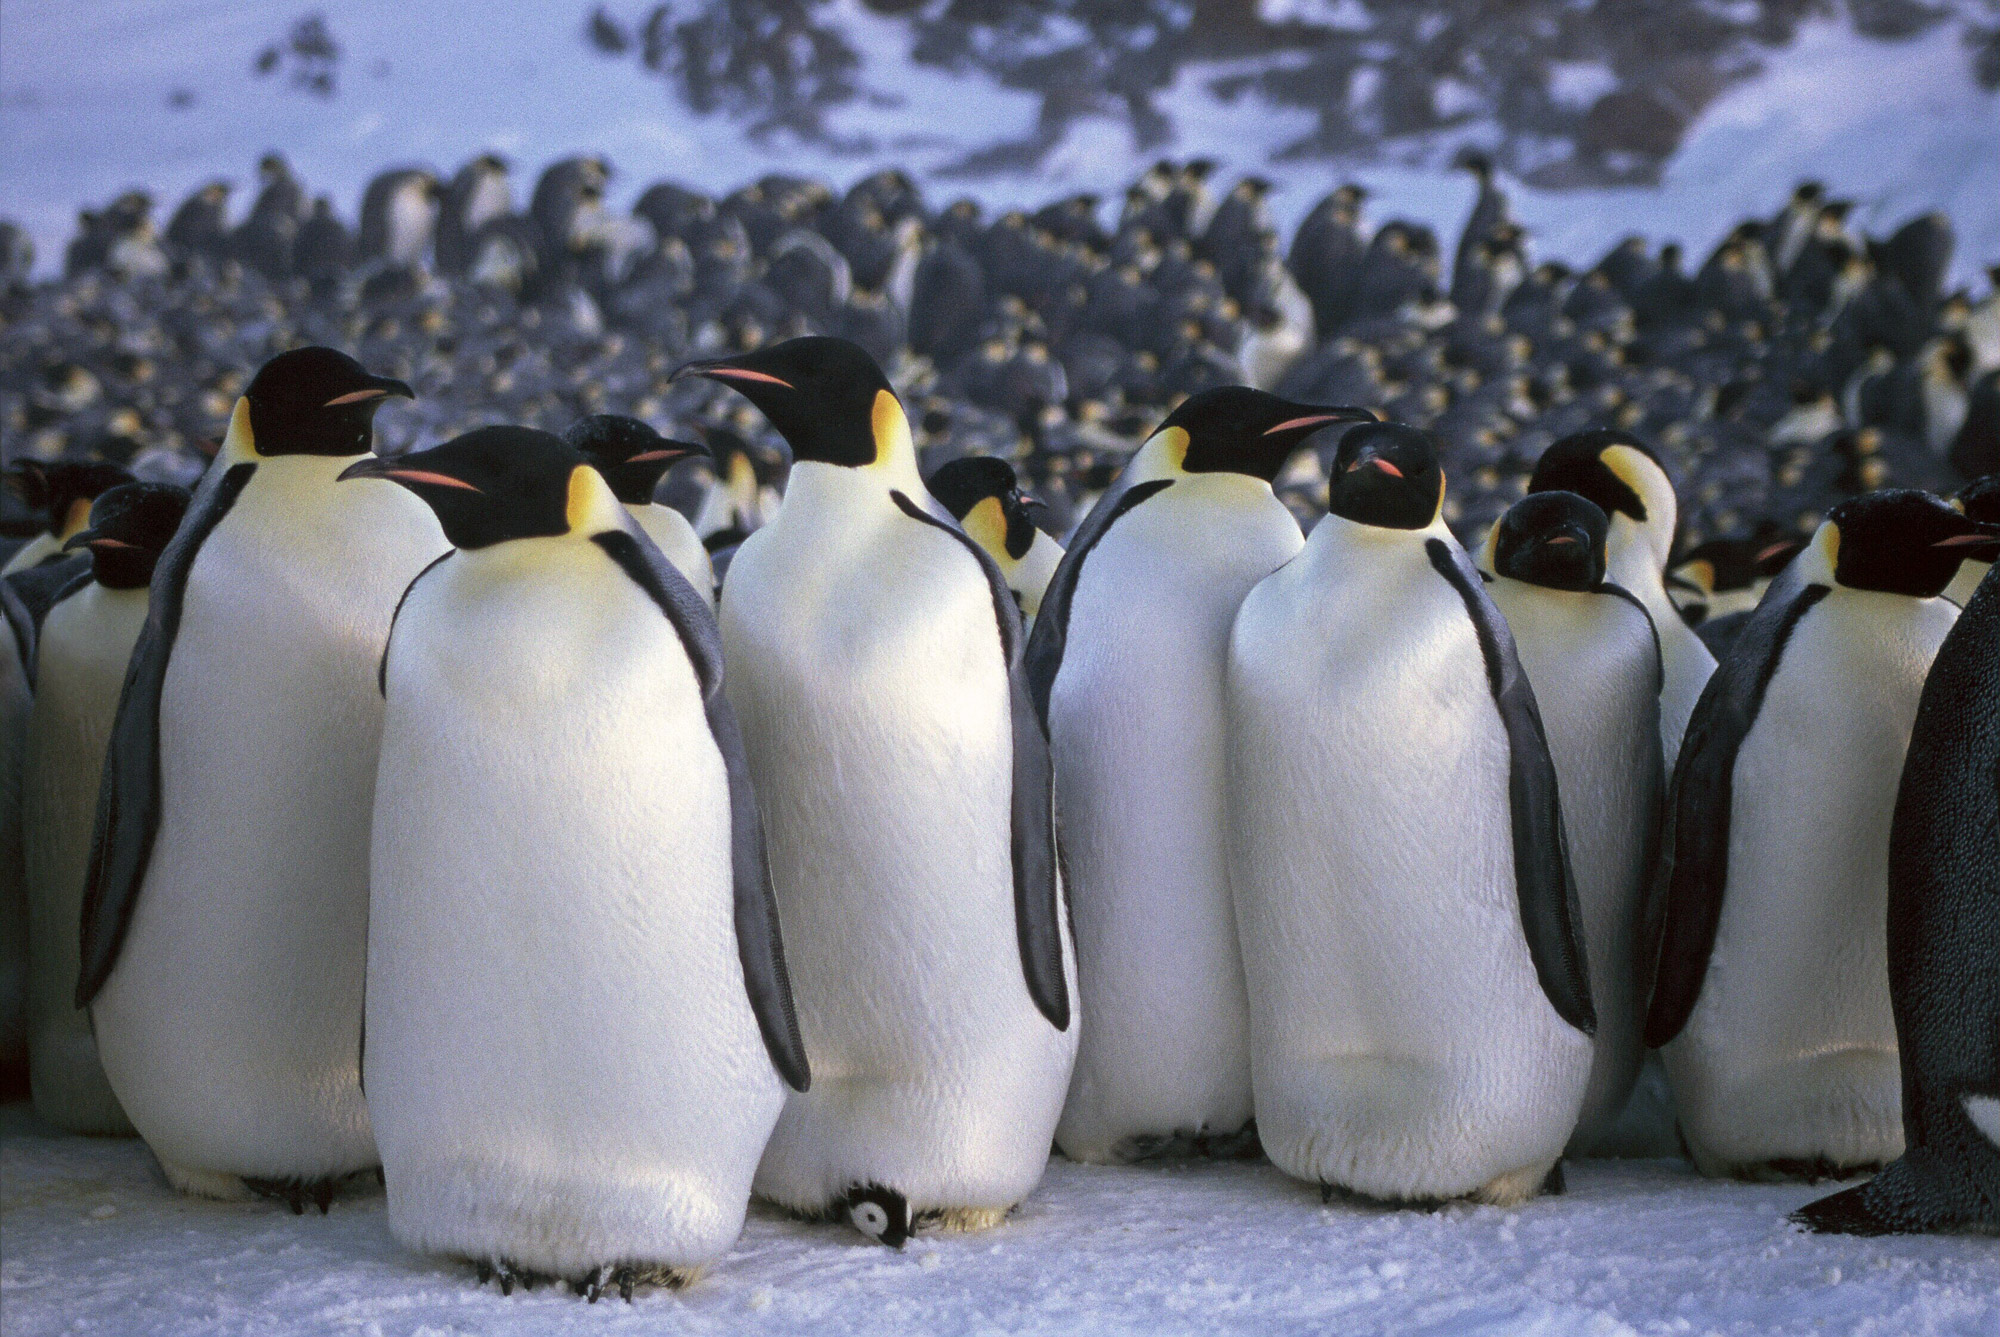 how do emperor penguins stay warm in antarctica when its so cold